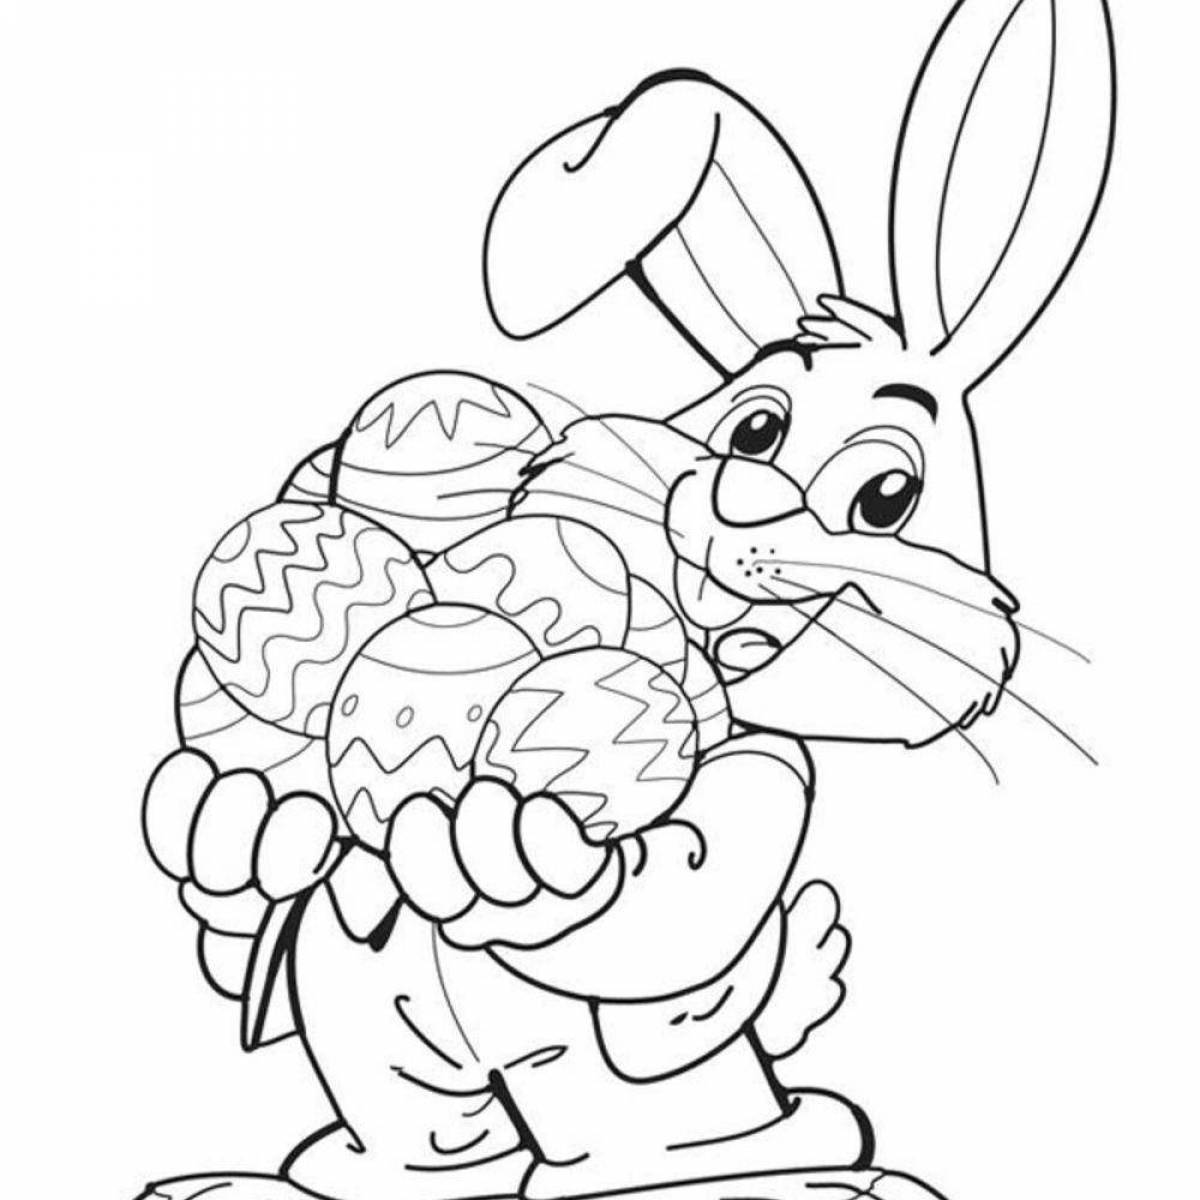 Naughty rabbit coloring book with carrots